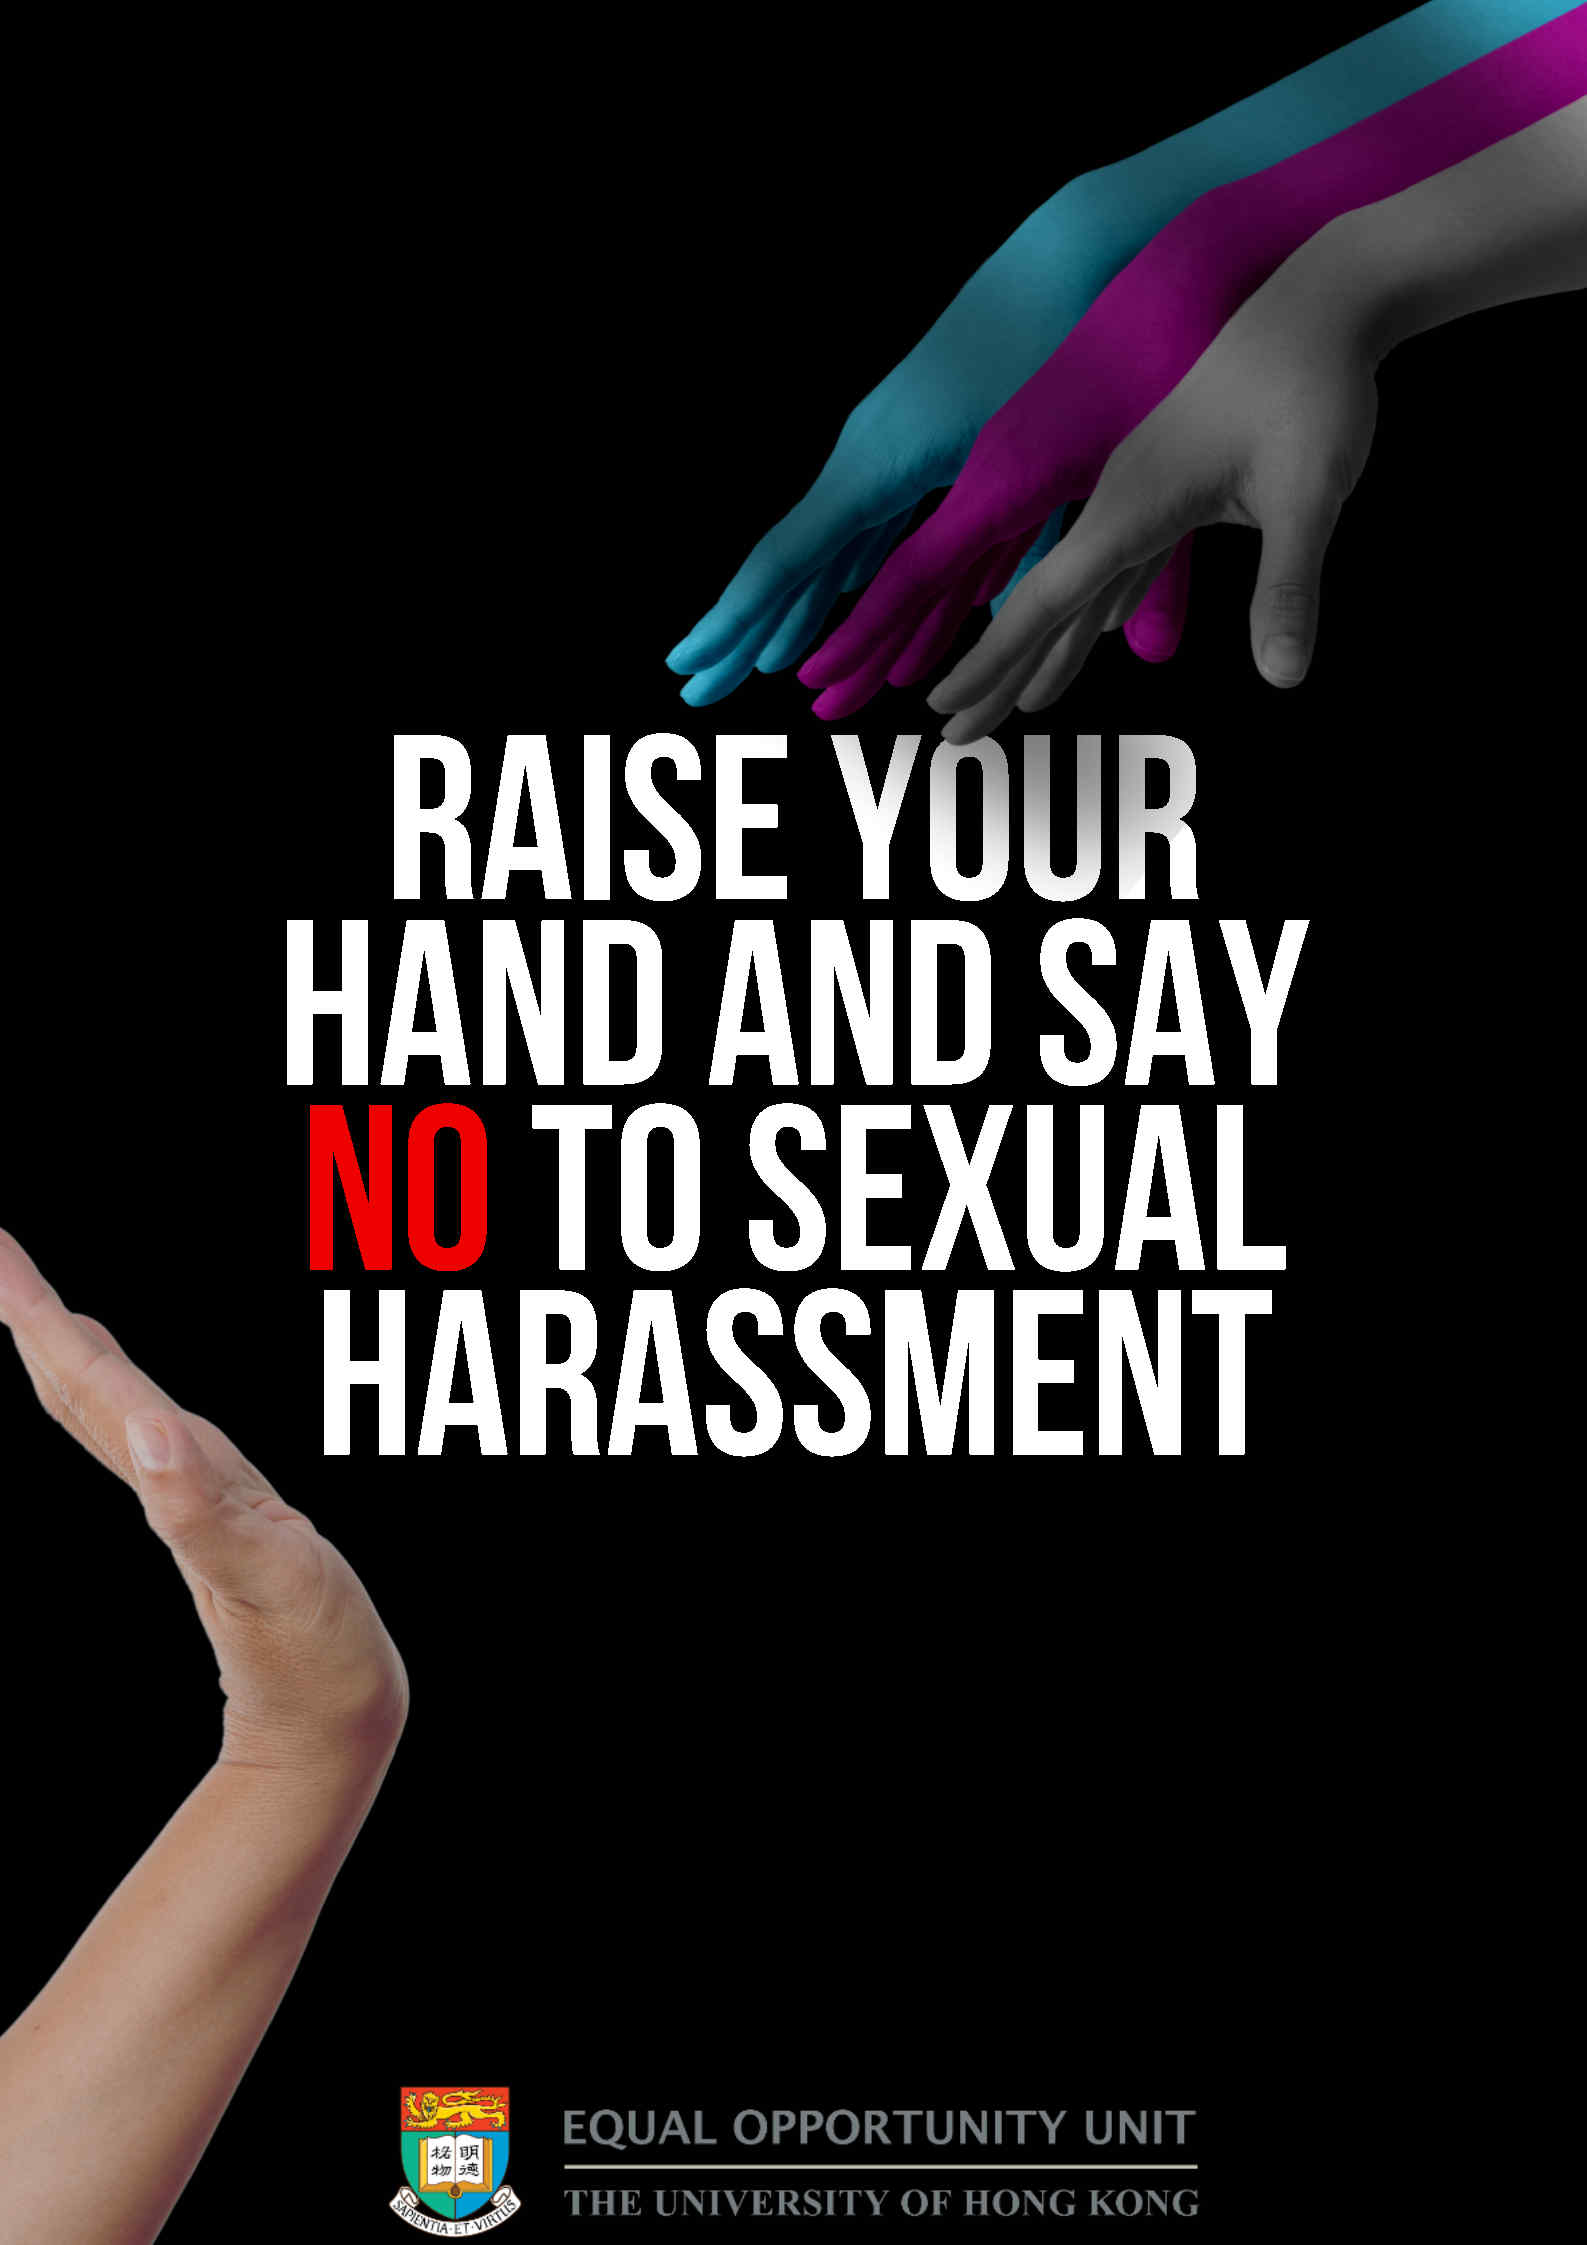 2nd Runner-up: Cheung Wai Yan Suki (Raise Your Hand and Say NO to Sexual Harassment) The poster features a bold and impactful design, with the central message "RAISE YOUR HAND AND SAY NO TO SEXUAL HARASSMENT" written in large, capital and white letters. The background is black, which conveys a sense of darkness and create a significant contrast. The poster also includes graphic of hands trying to approach another hand while another hand strongly stop them, further emphasizing the message to stop sexual harassment. The great contrast of use of colour also serves as a reminder that sexual harassment is evil and intolerant. Overall, the poster is simple, yet effective, with a clear call to action that encourages viewers to take a strong stand against sexual harassment.